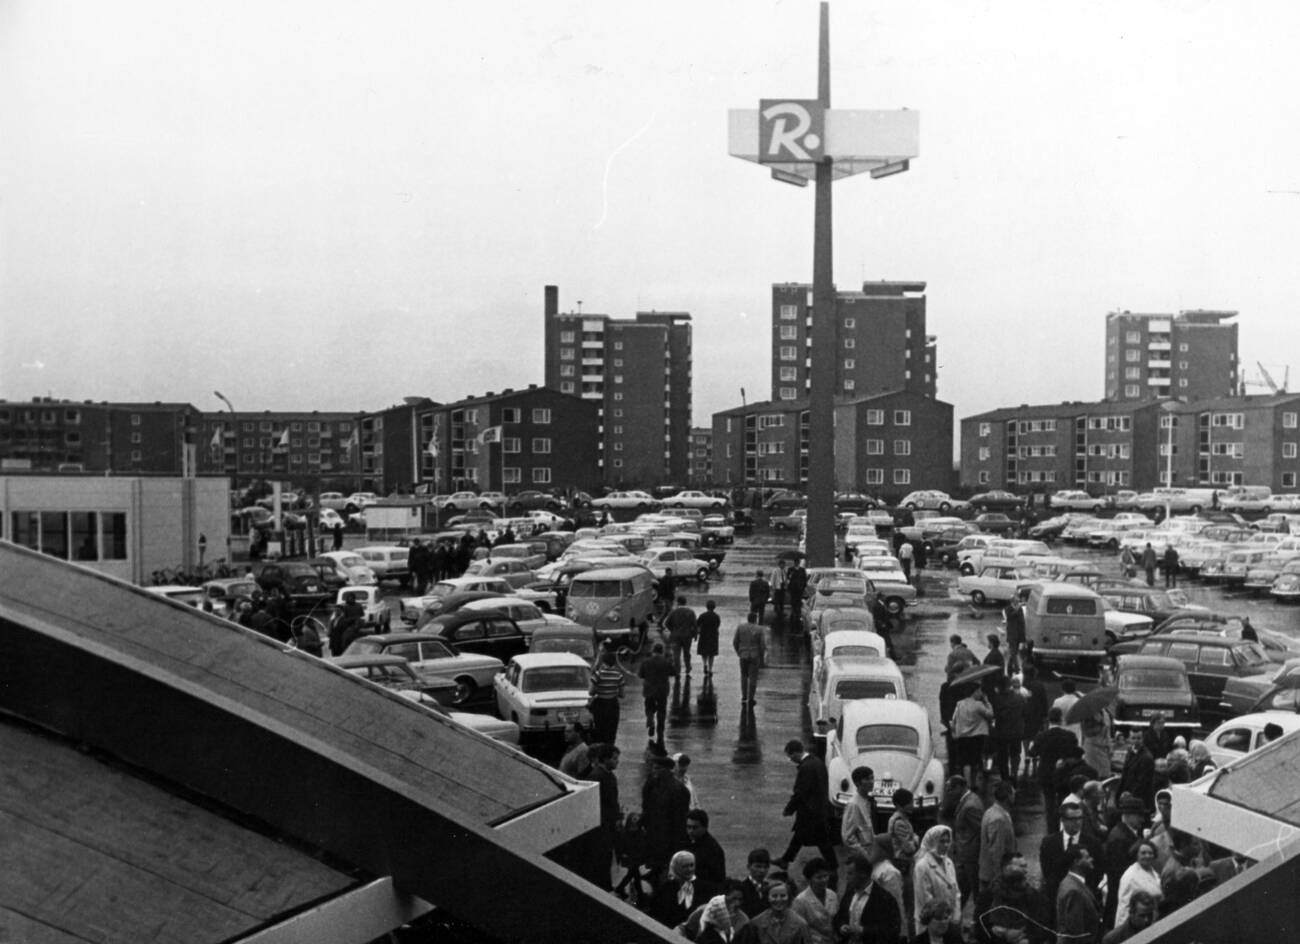 The parking space of the Eidelstedt shopping centre in Hamburg, Germany in 1970.